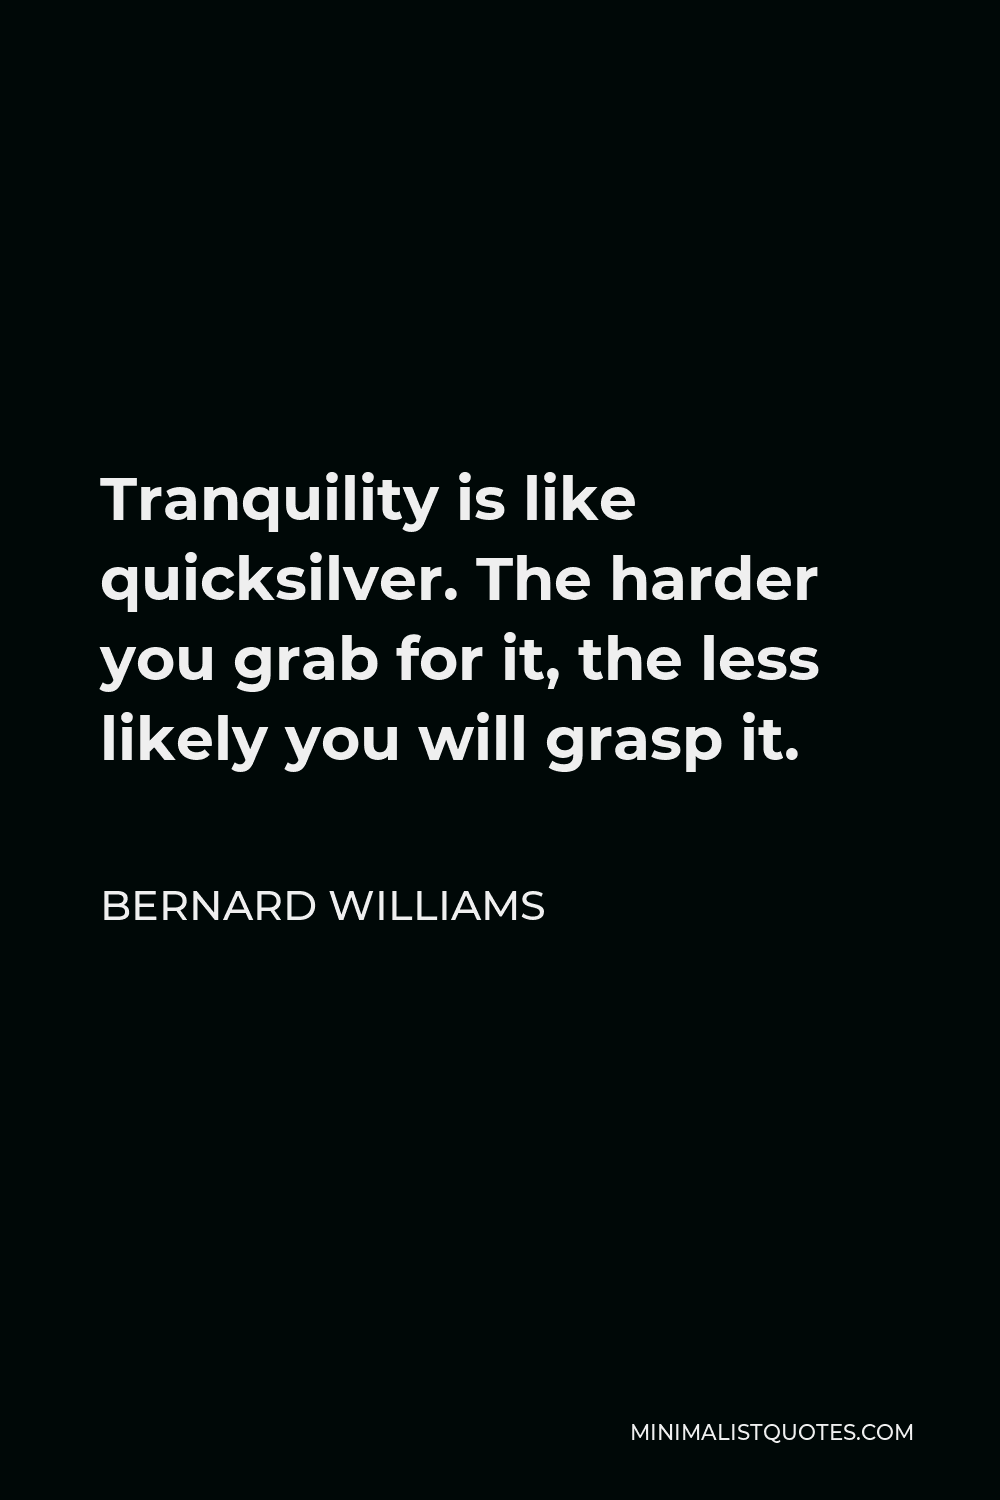 Bernard Williams Quote - Tranquility is like quicksilver. The harder you grab for it, the less likely you will grasp it.